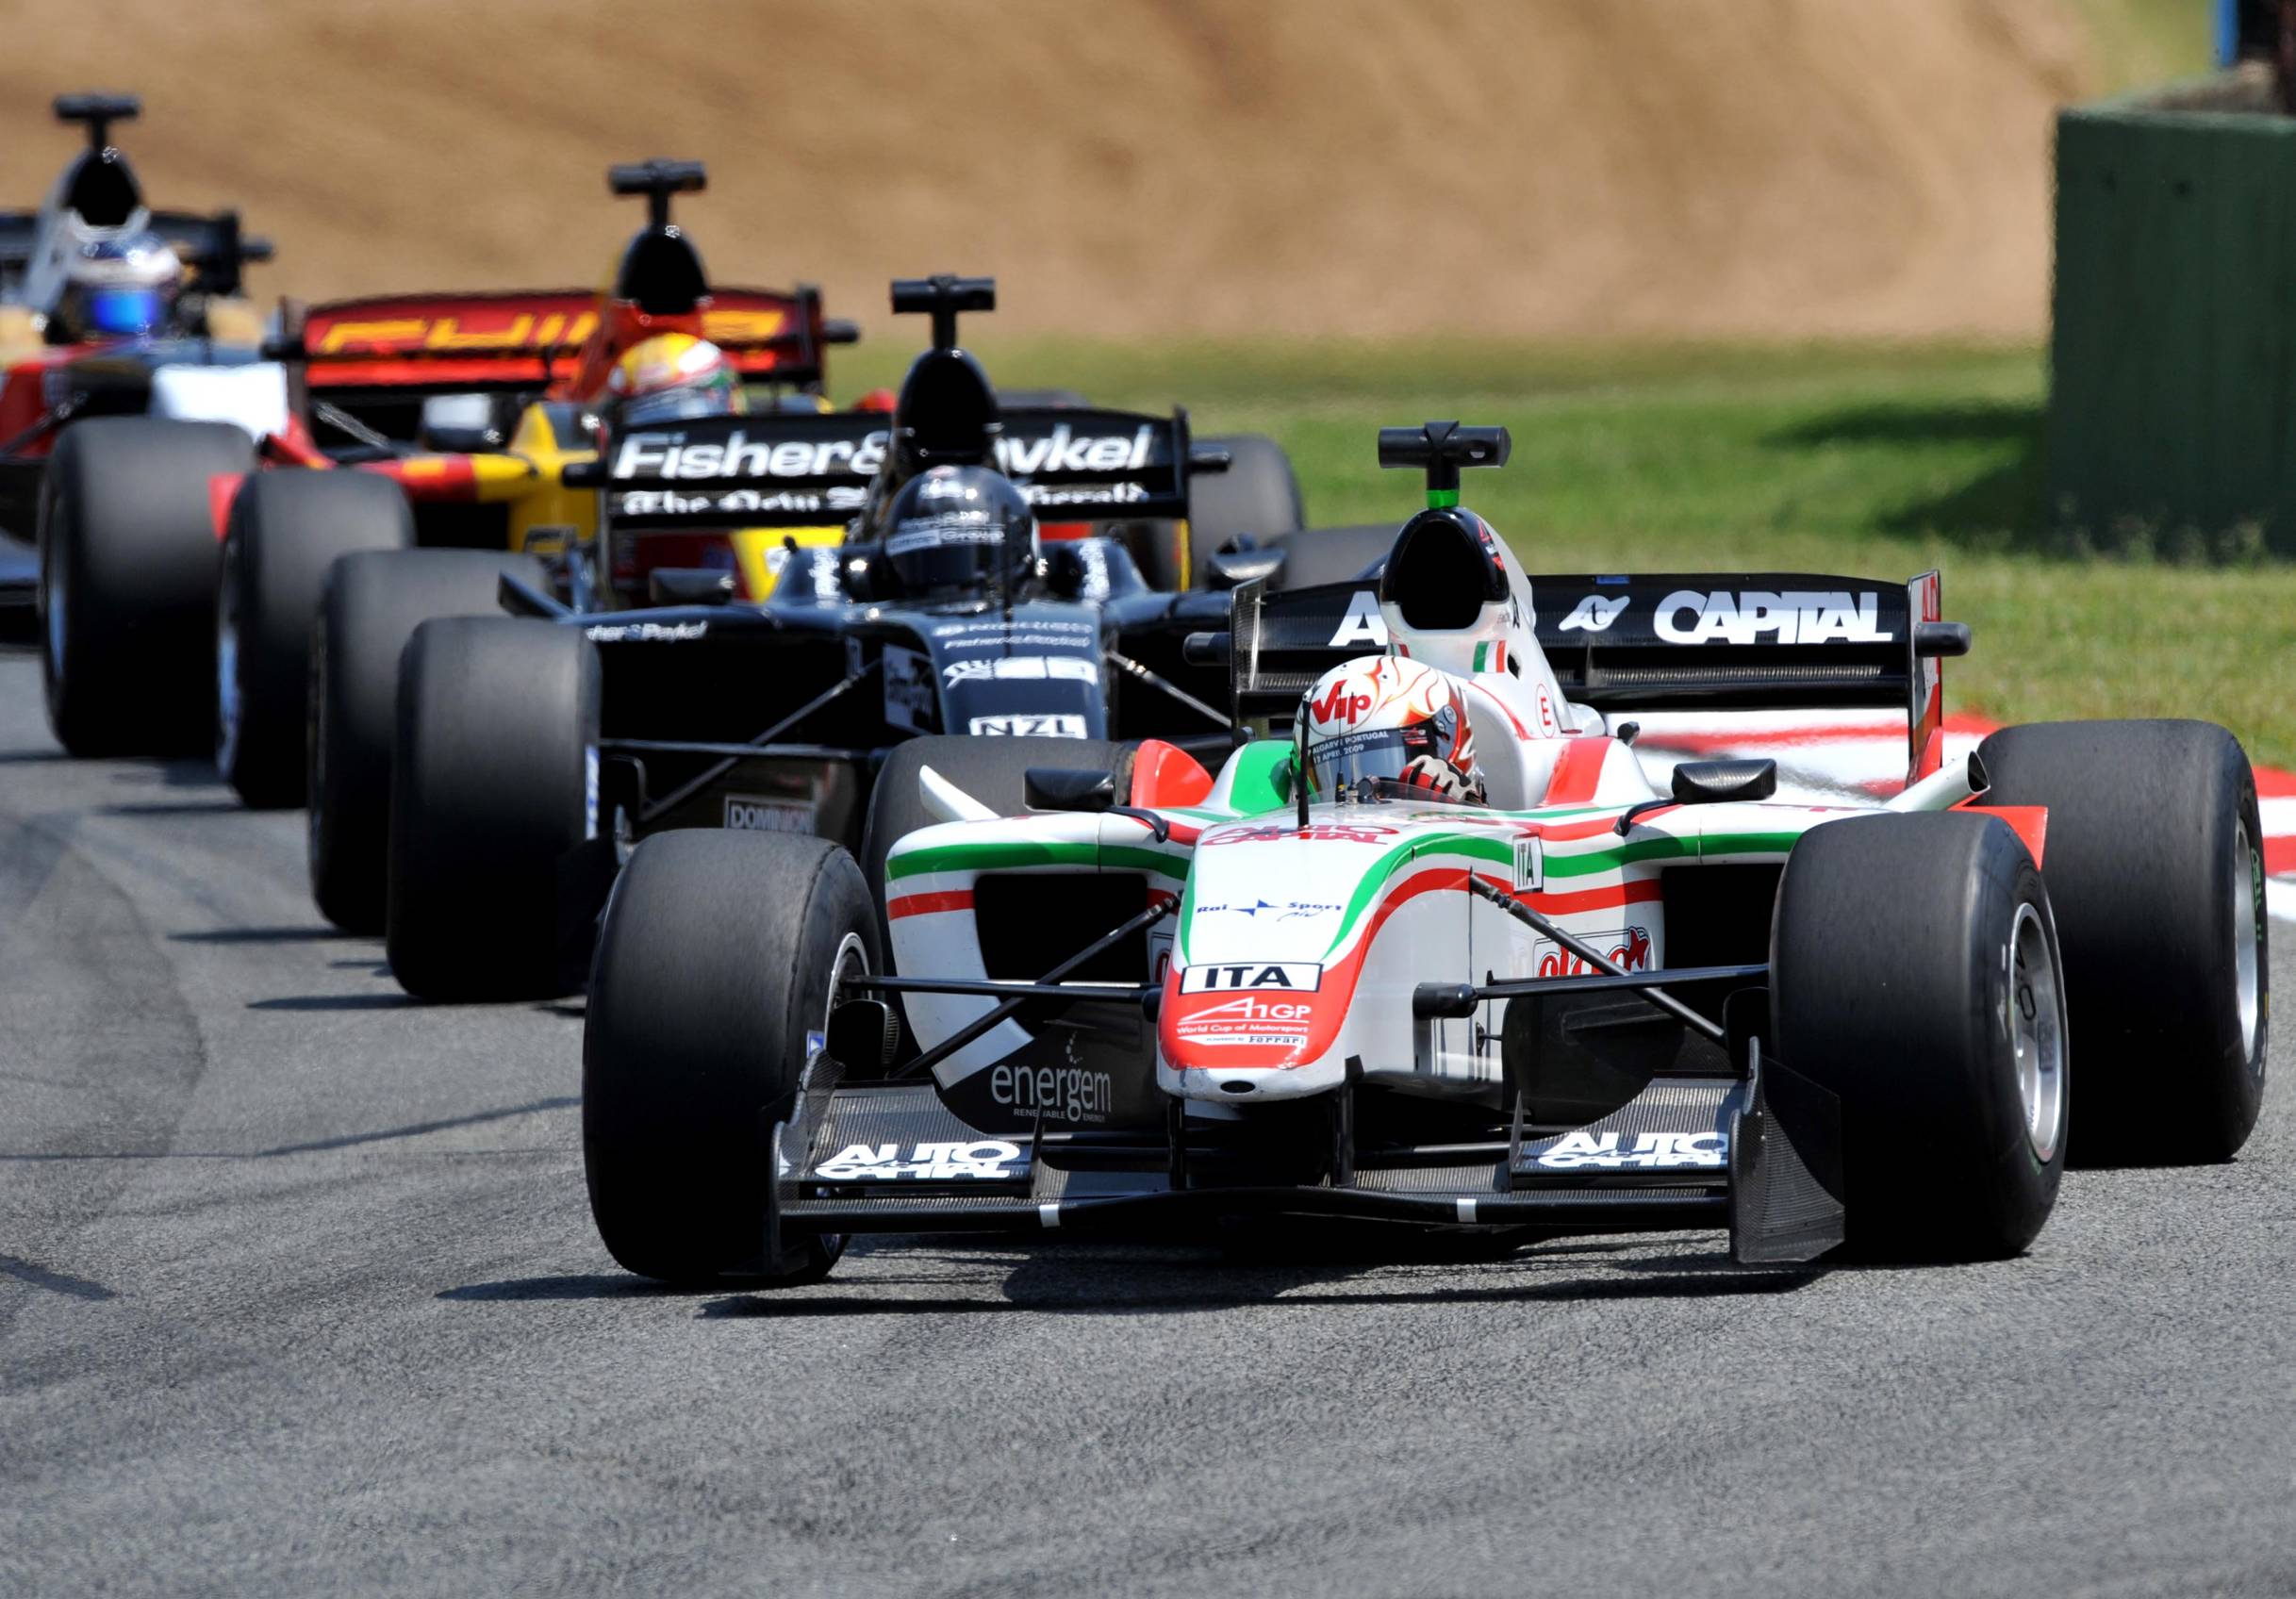 A1GP, dubbed the World Cup of Motorsport, could be relaunched next year